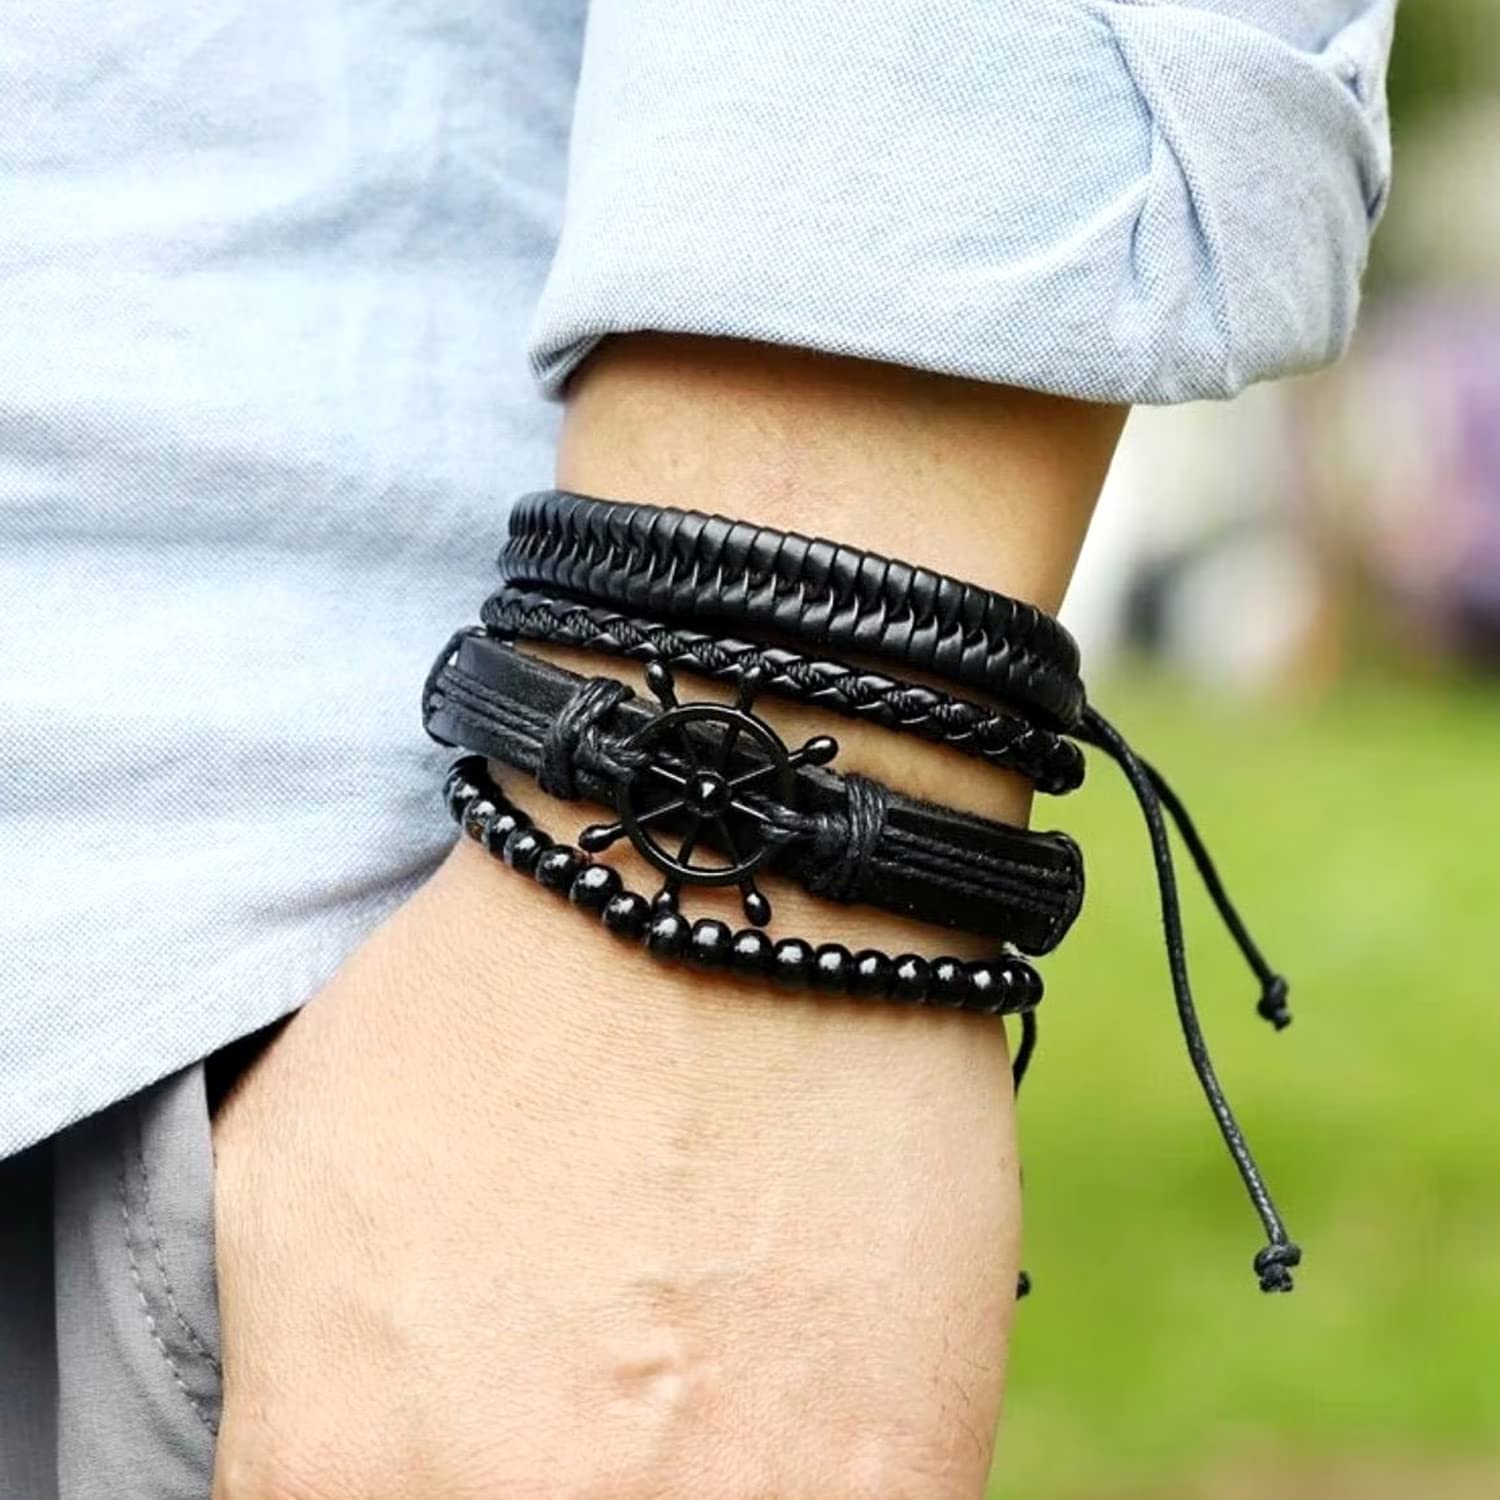 Inspirational Friendship Leather Bracelet For Kids With Autism Adoptable Boy  Or Girl Charm Wrap Wristband Perfect Gift For Childrens Awareness From  Commo_dpp, $0.83 | DHgate.Com